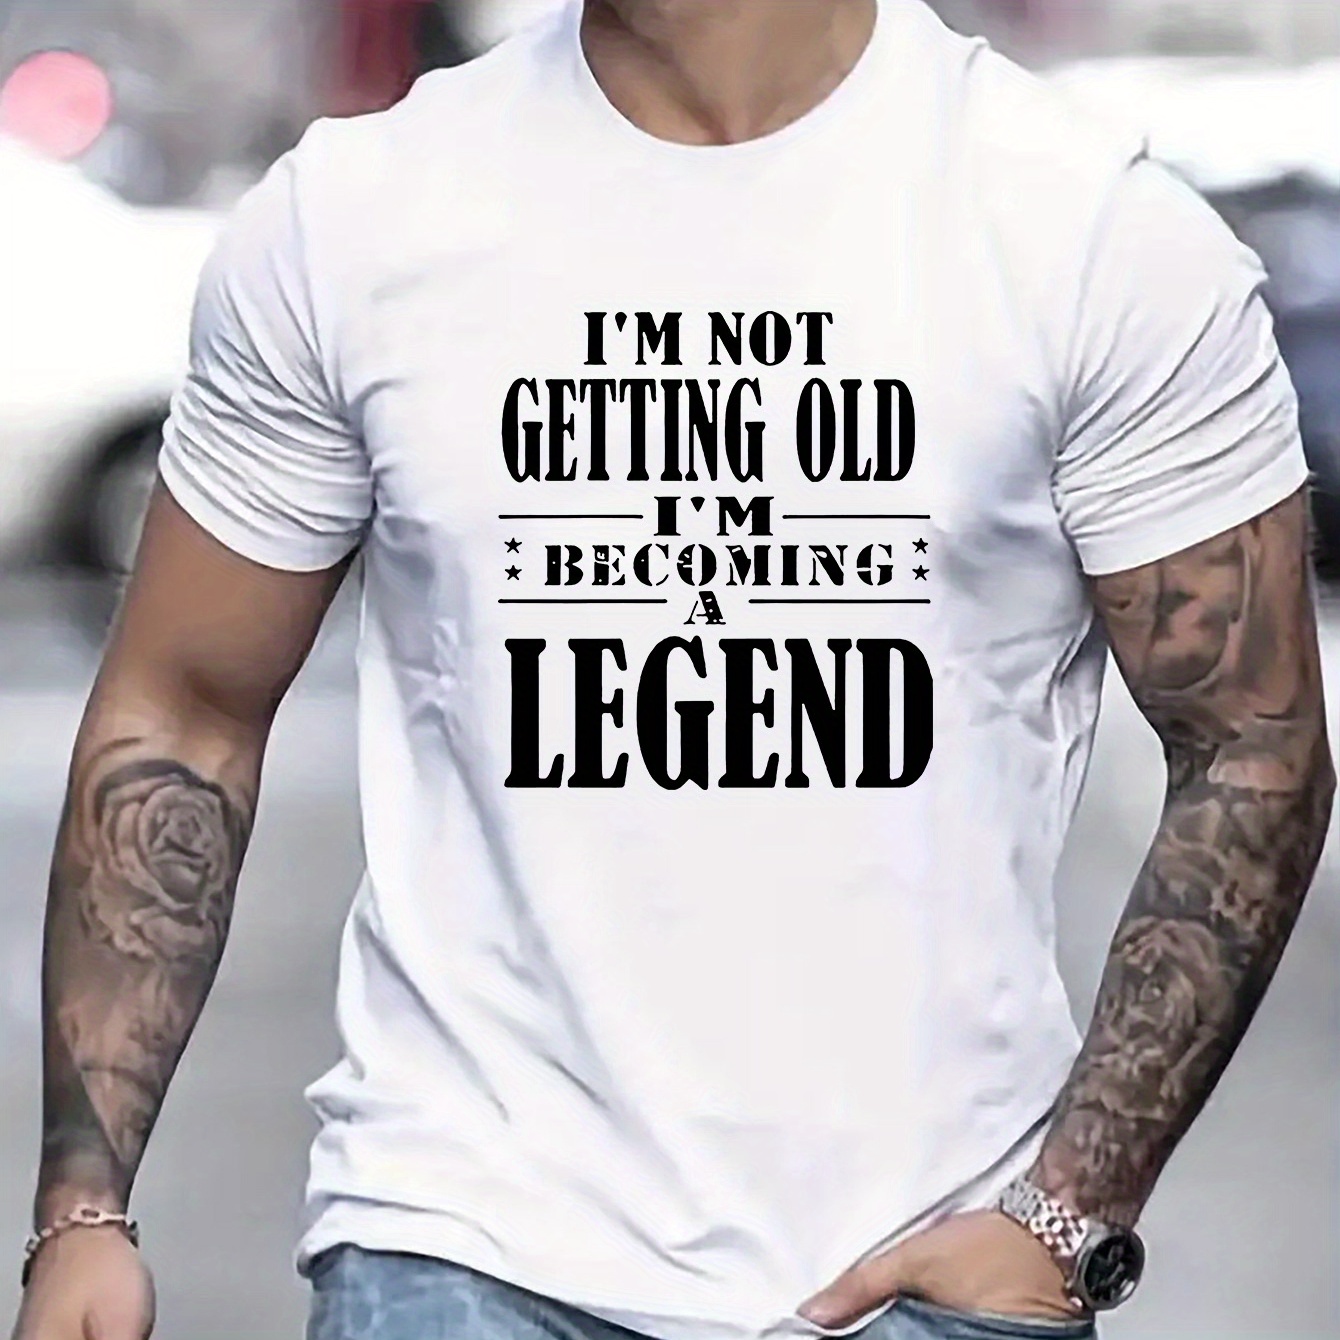 

I'm Not Getting Old, I'm Becoming A Legend Print T-shirt, Versatile & Breathable Street , Simple Lightweight Comfy Top, Casual Crew Neck Short Sleeve T-shirt For Summer